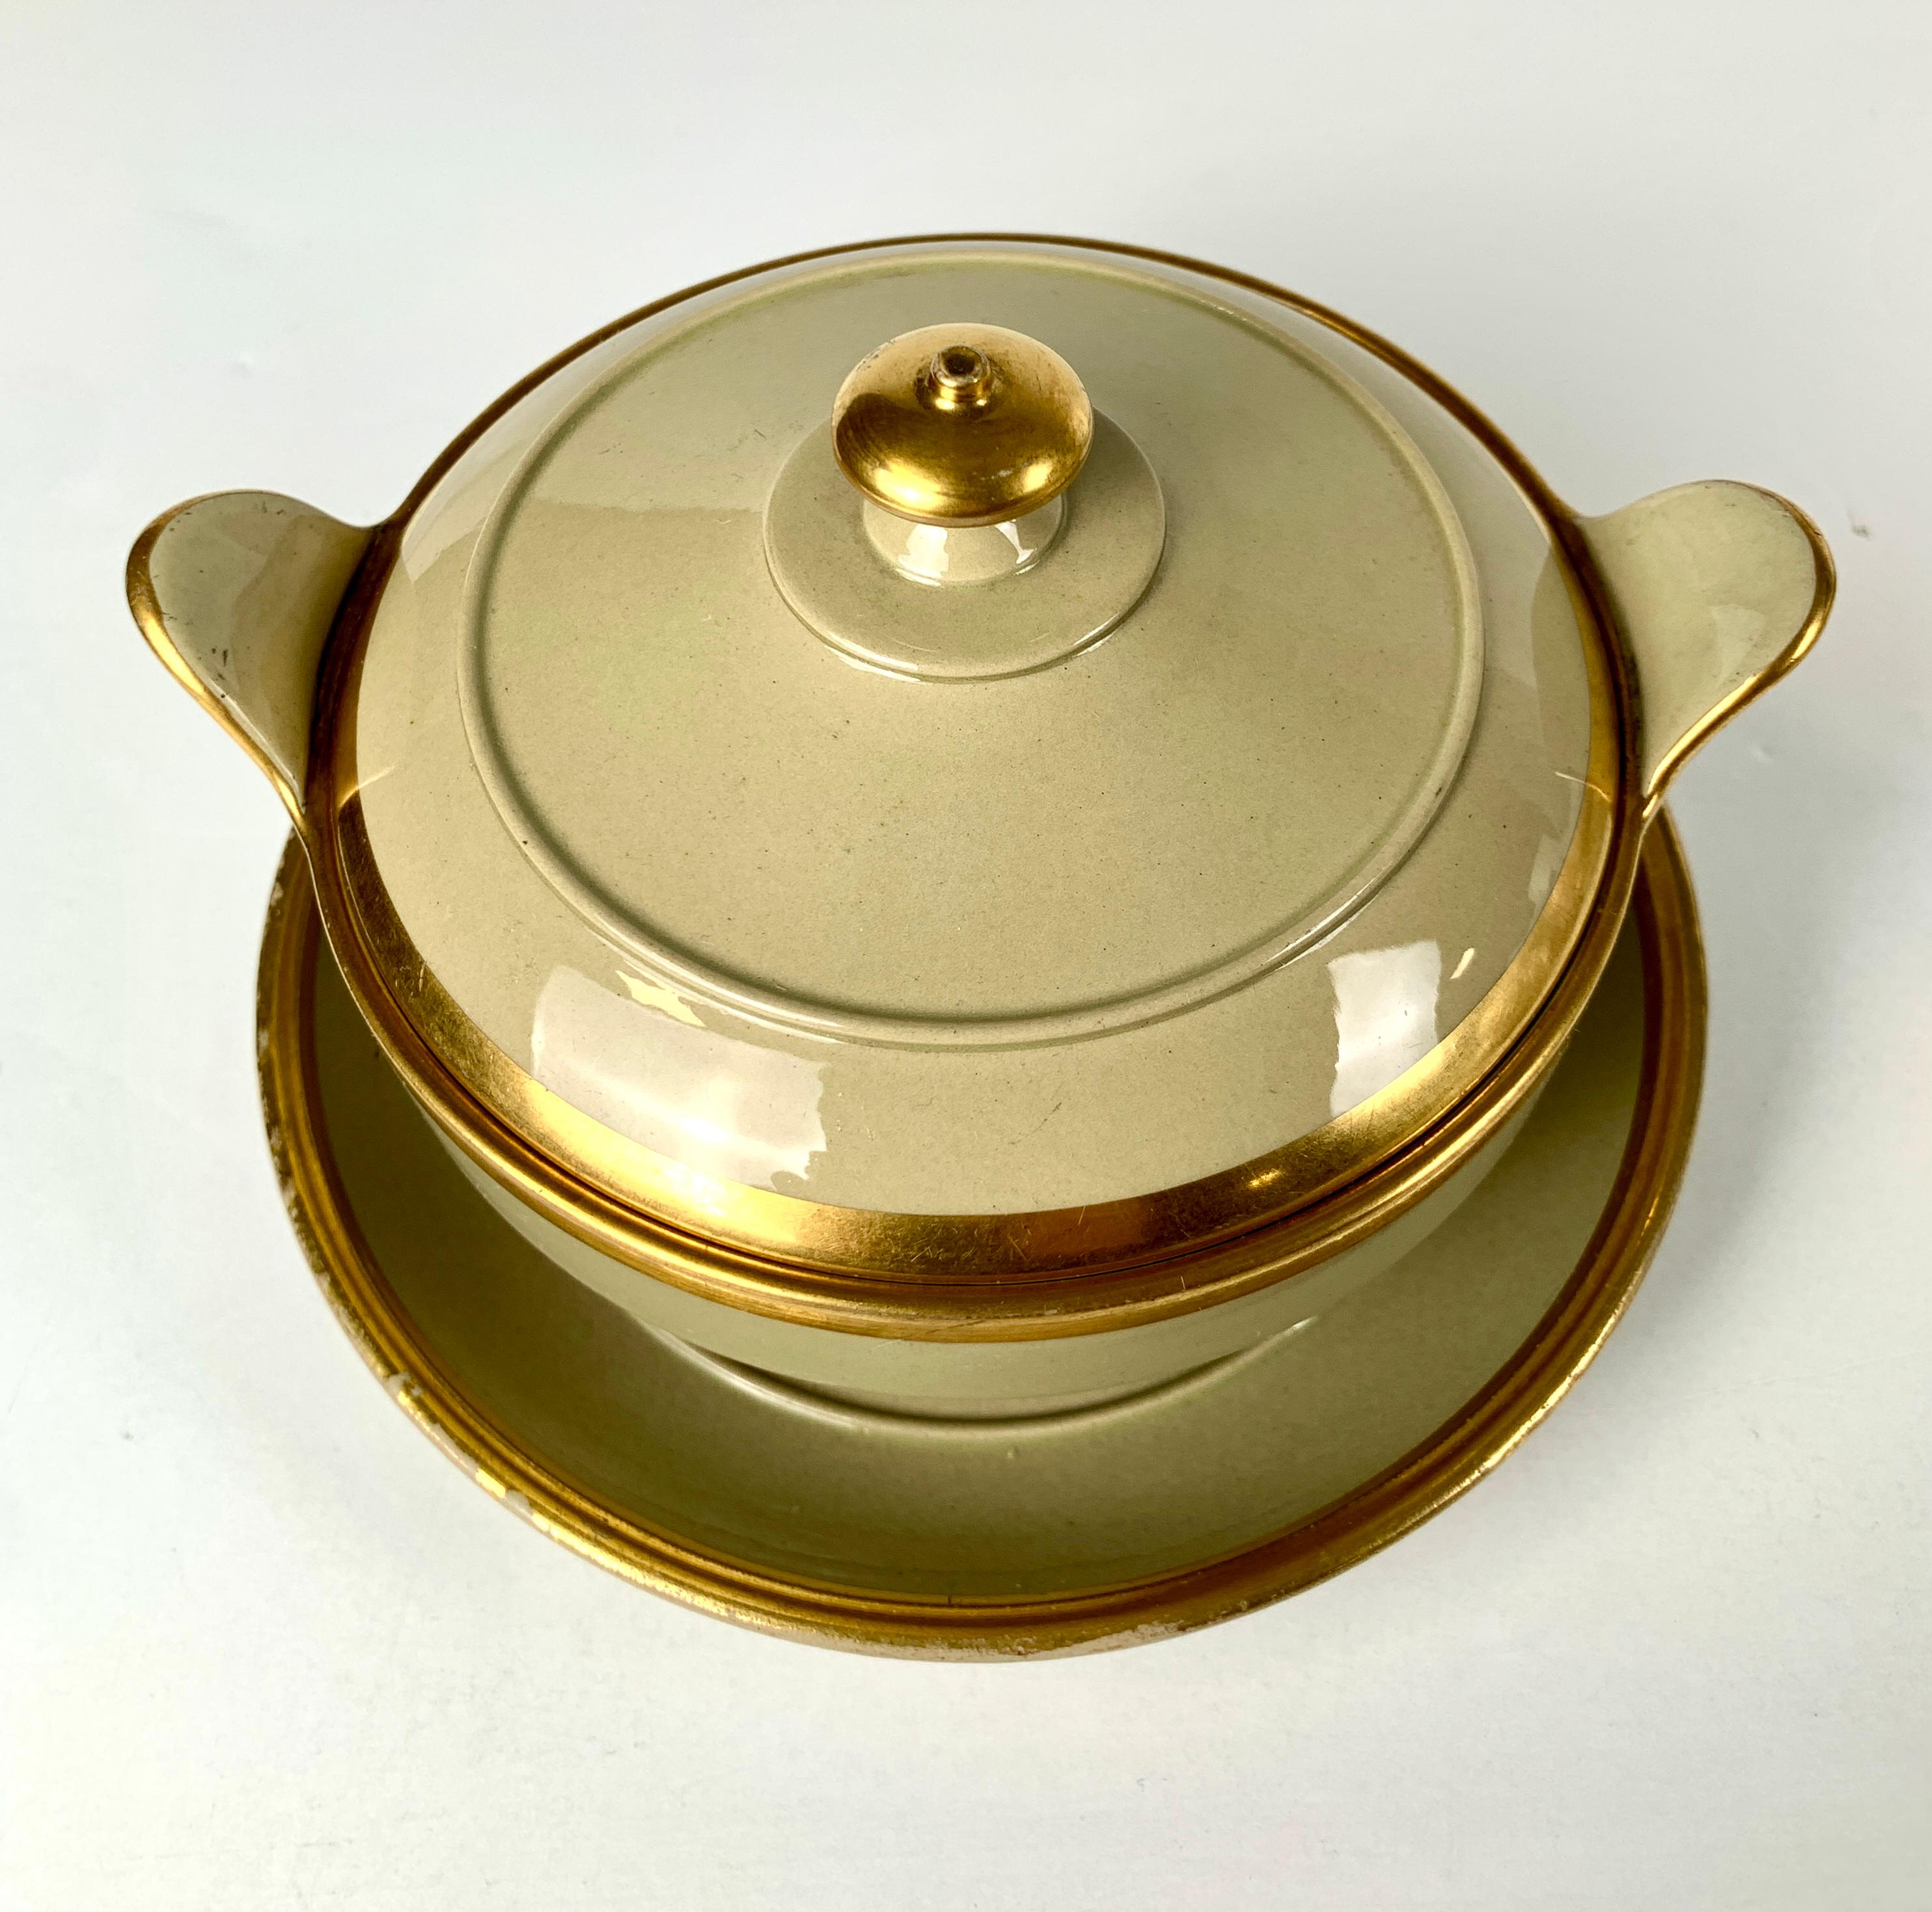 Wedgwood made this drabware sugar bowl and stand in Staffordshire, England, in the first quarter of the 19th century, circa 1825.
The design is simple and elegant, and the decoration is minimal, with only a bit of gilt trim accentuating the shape